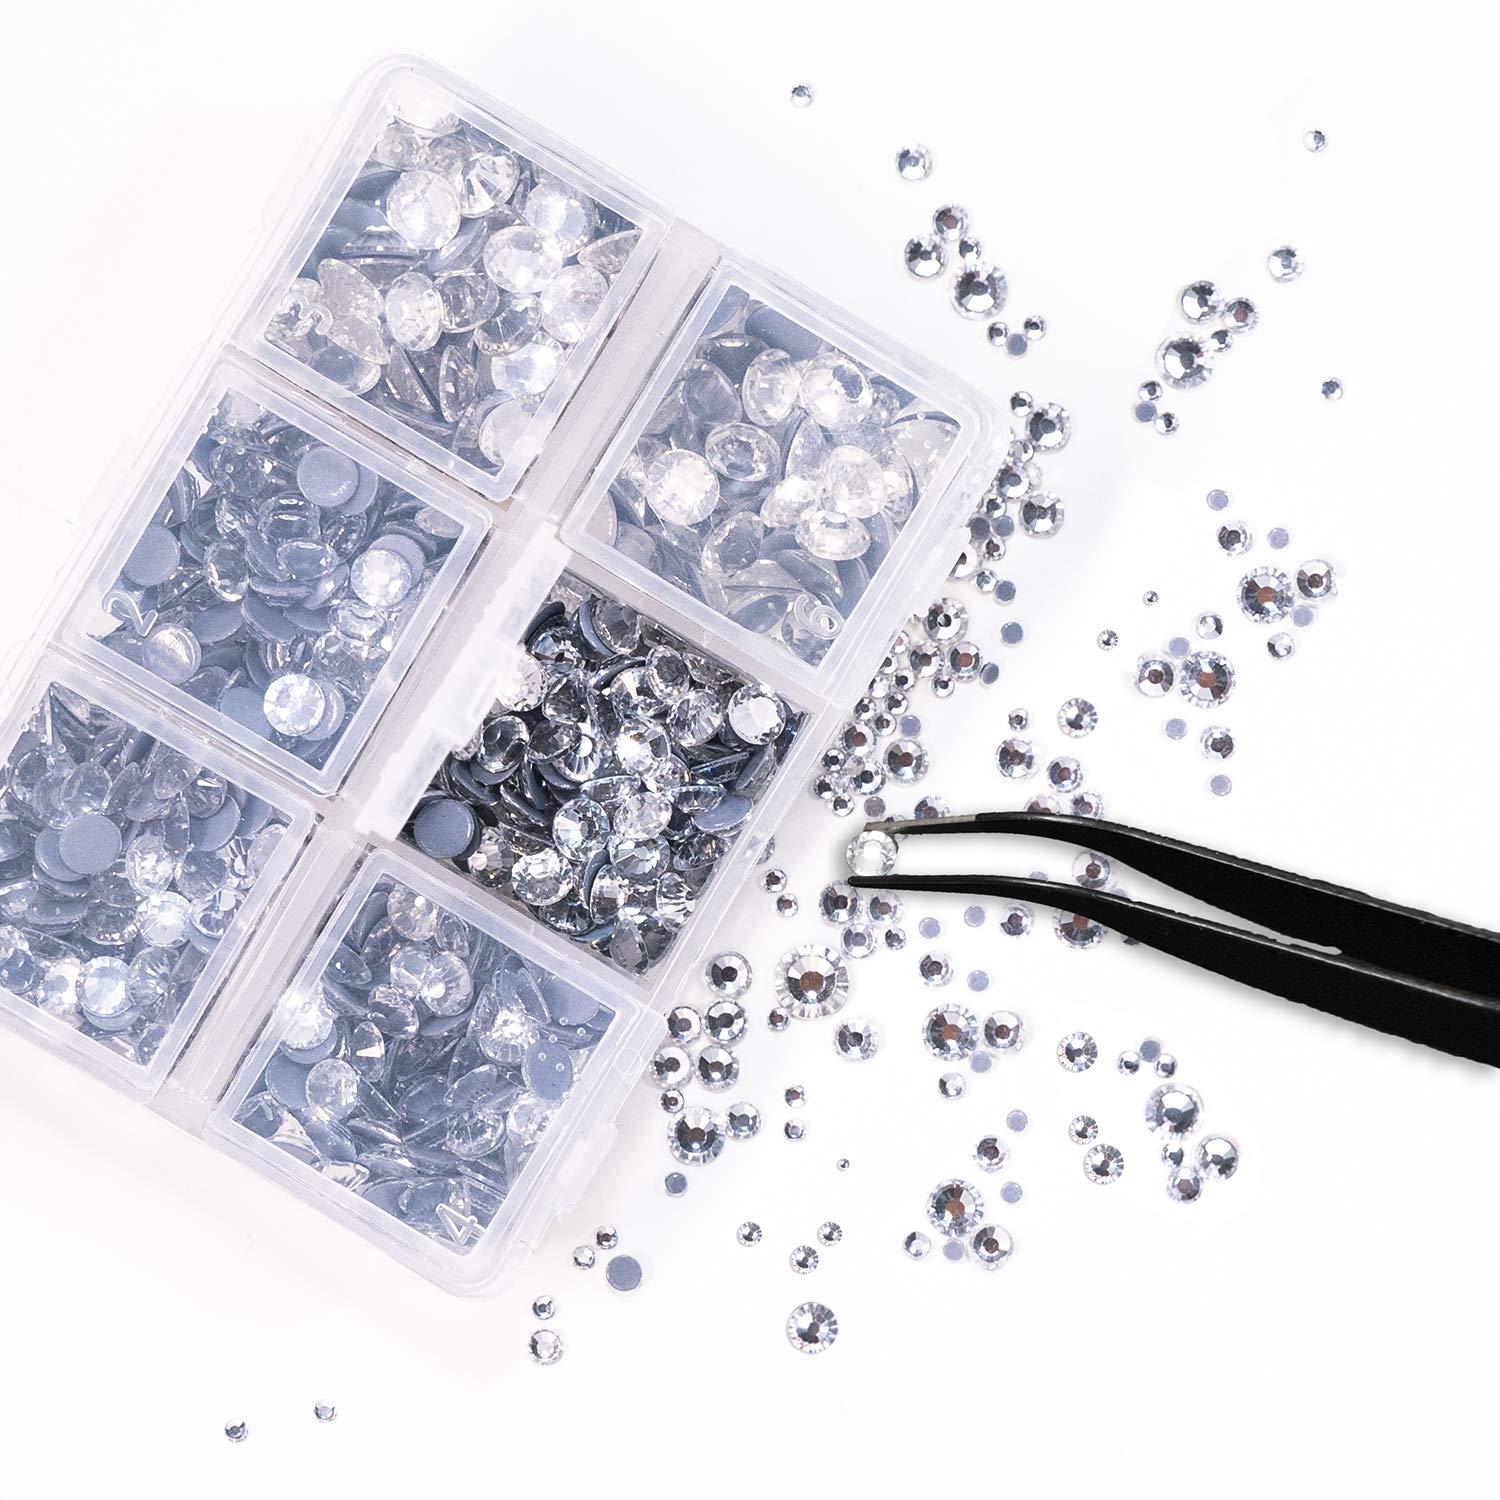 OUTUXED 5040pcs Clear Rhinestones for Crafts, Flatback White Nail Gems,  Craft Glass Diamonds Stones with Tweezers and Picking Pen, SS6-SS20 Crystal